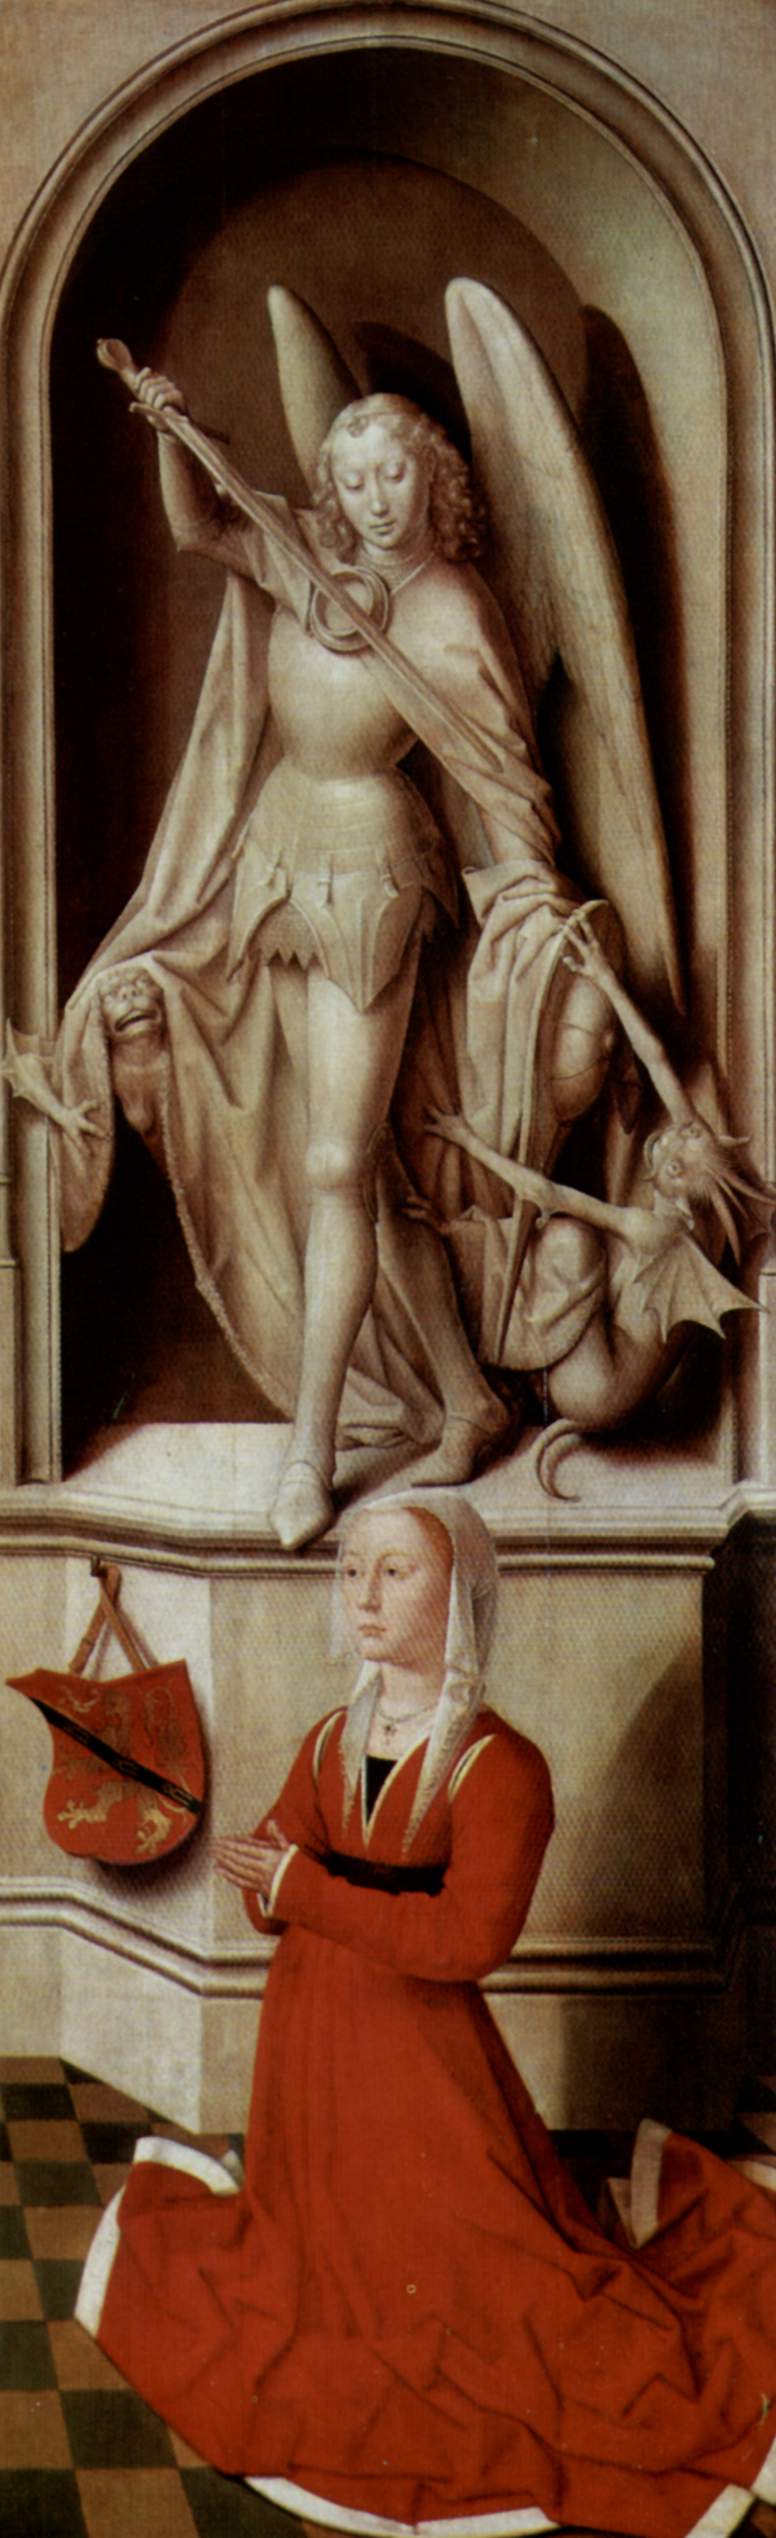 The Last Judgment, triptych, right wing Praying donor Catherine Tanagli with archangel Michael